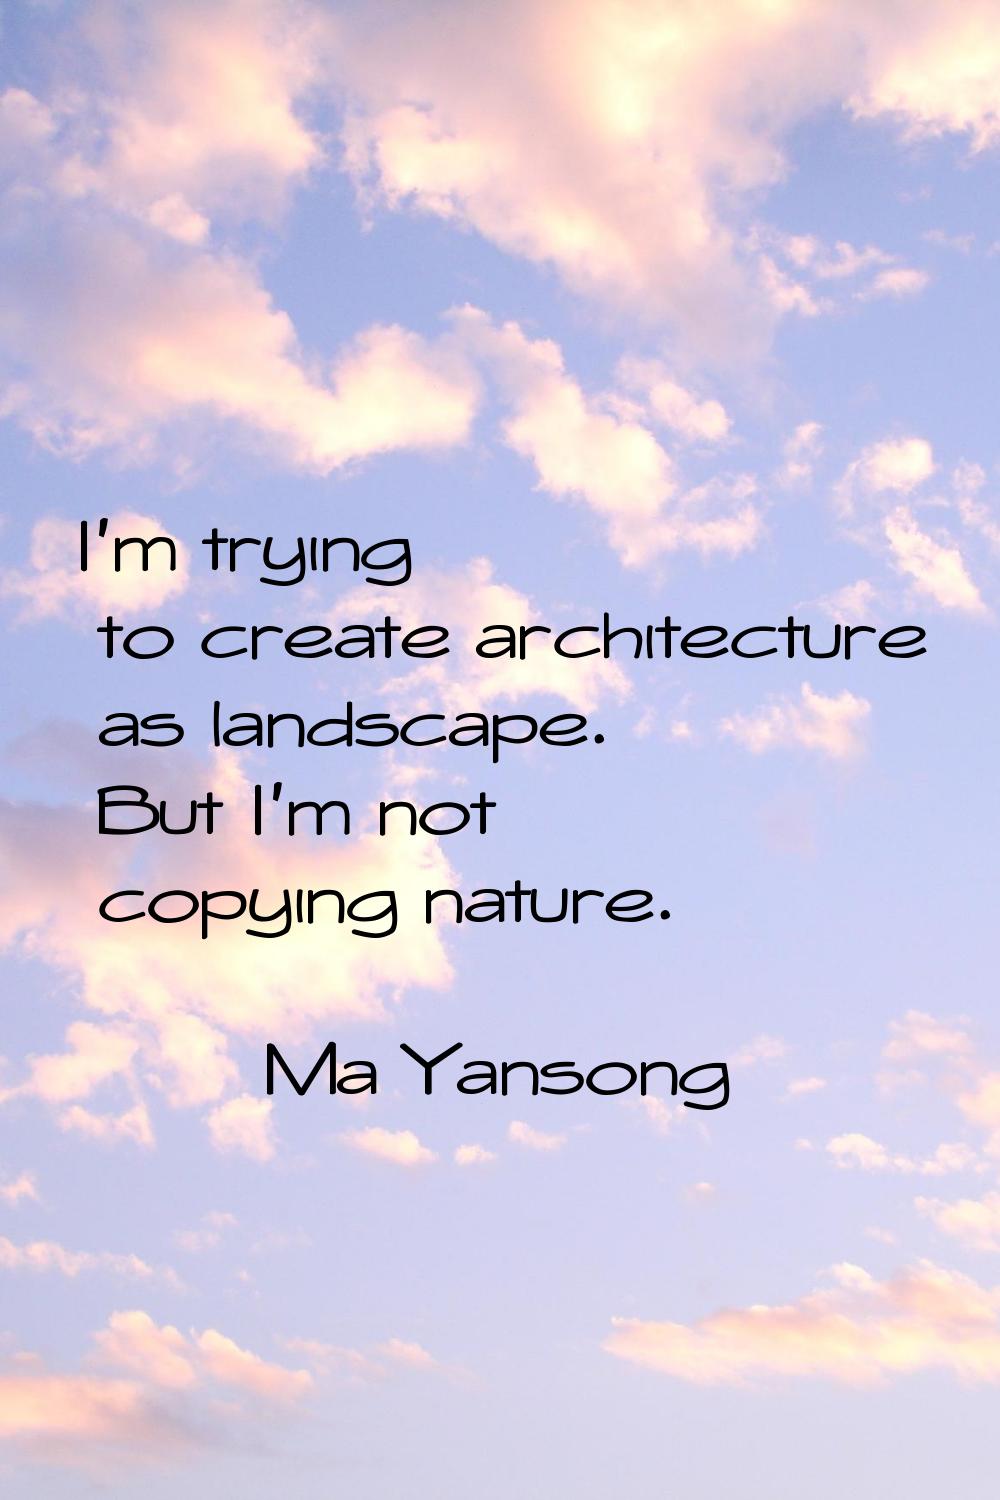 I'm trying to create architecture as landscape. But I'm not copying nature.